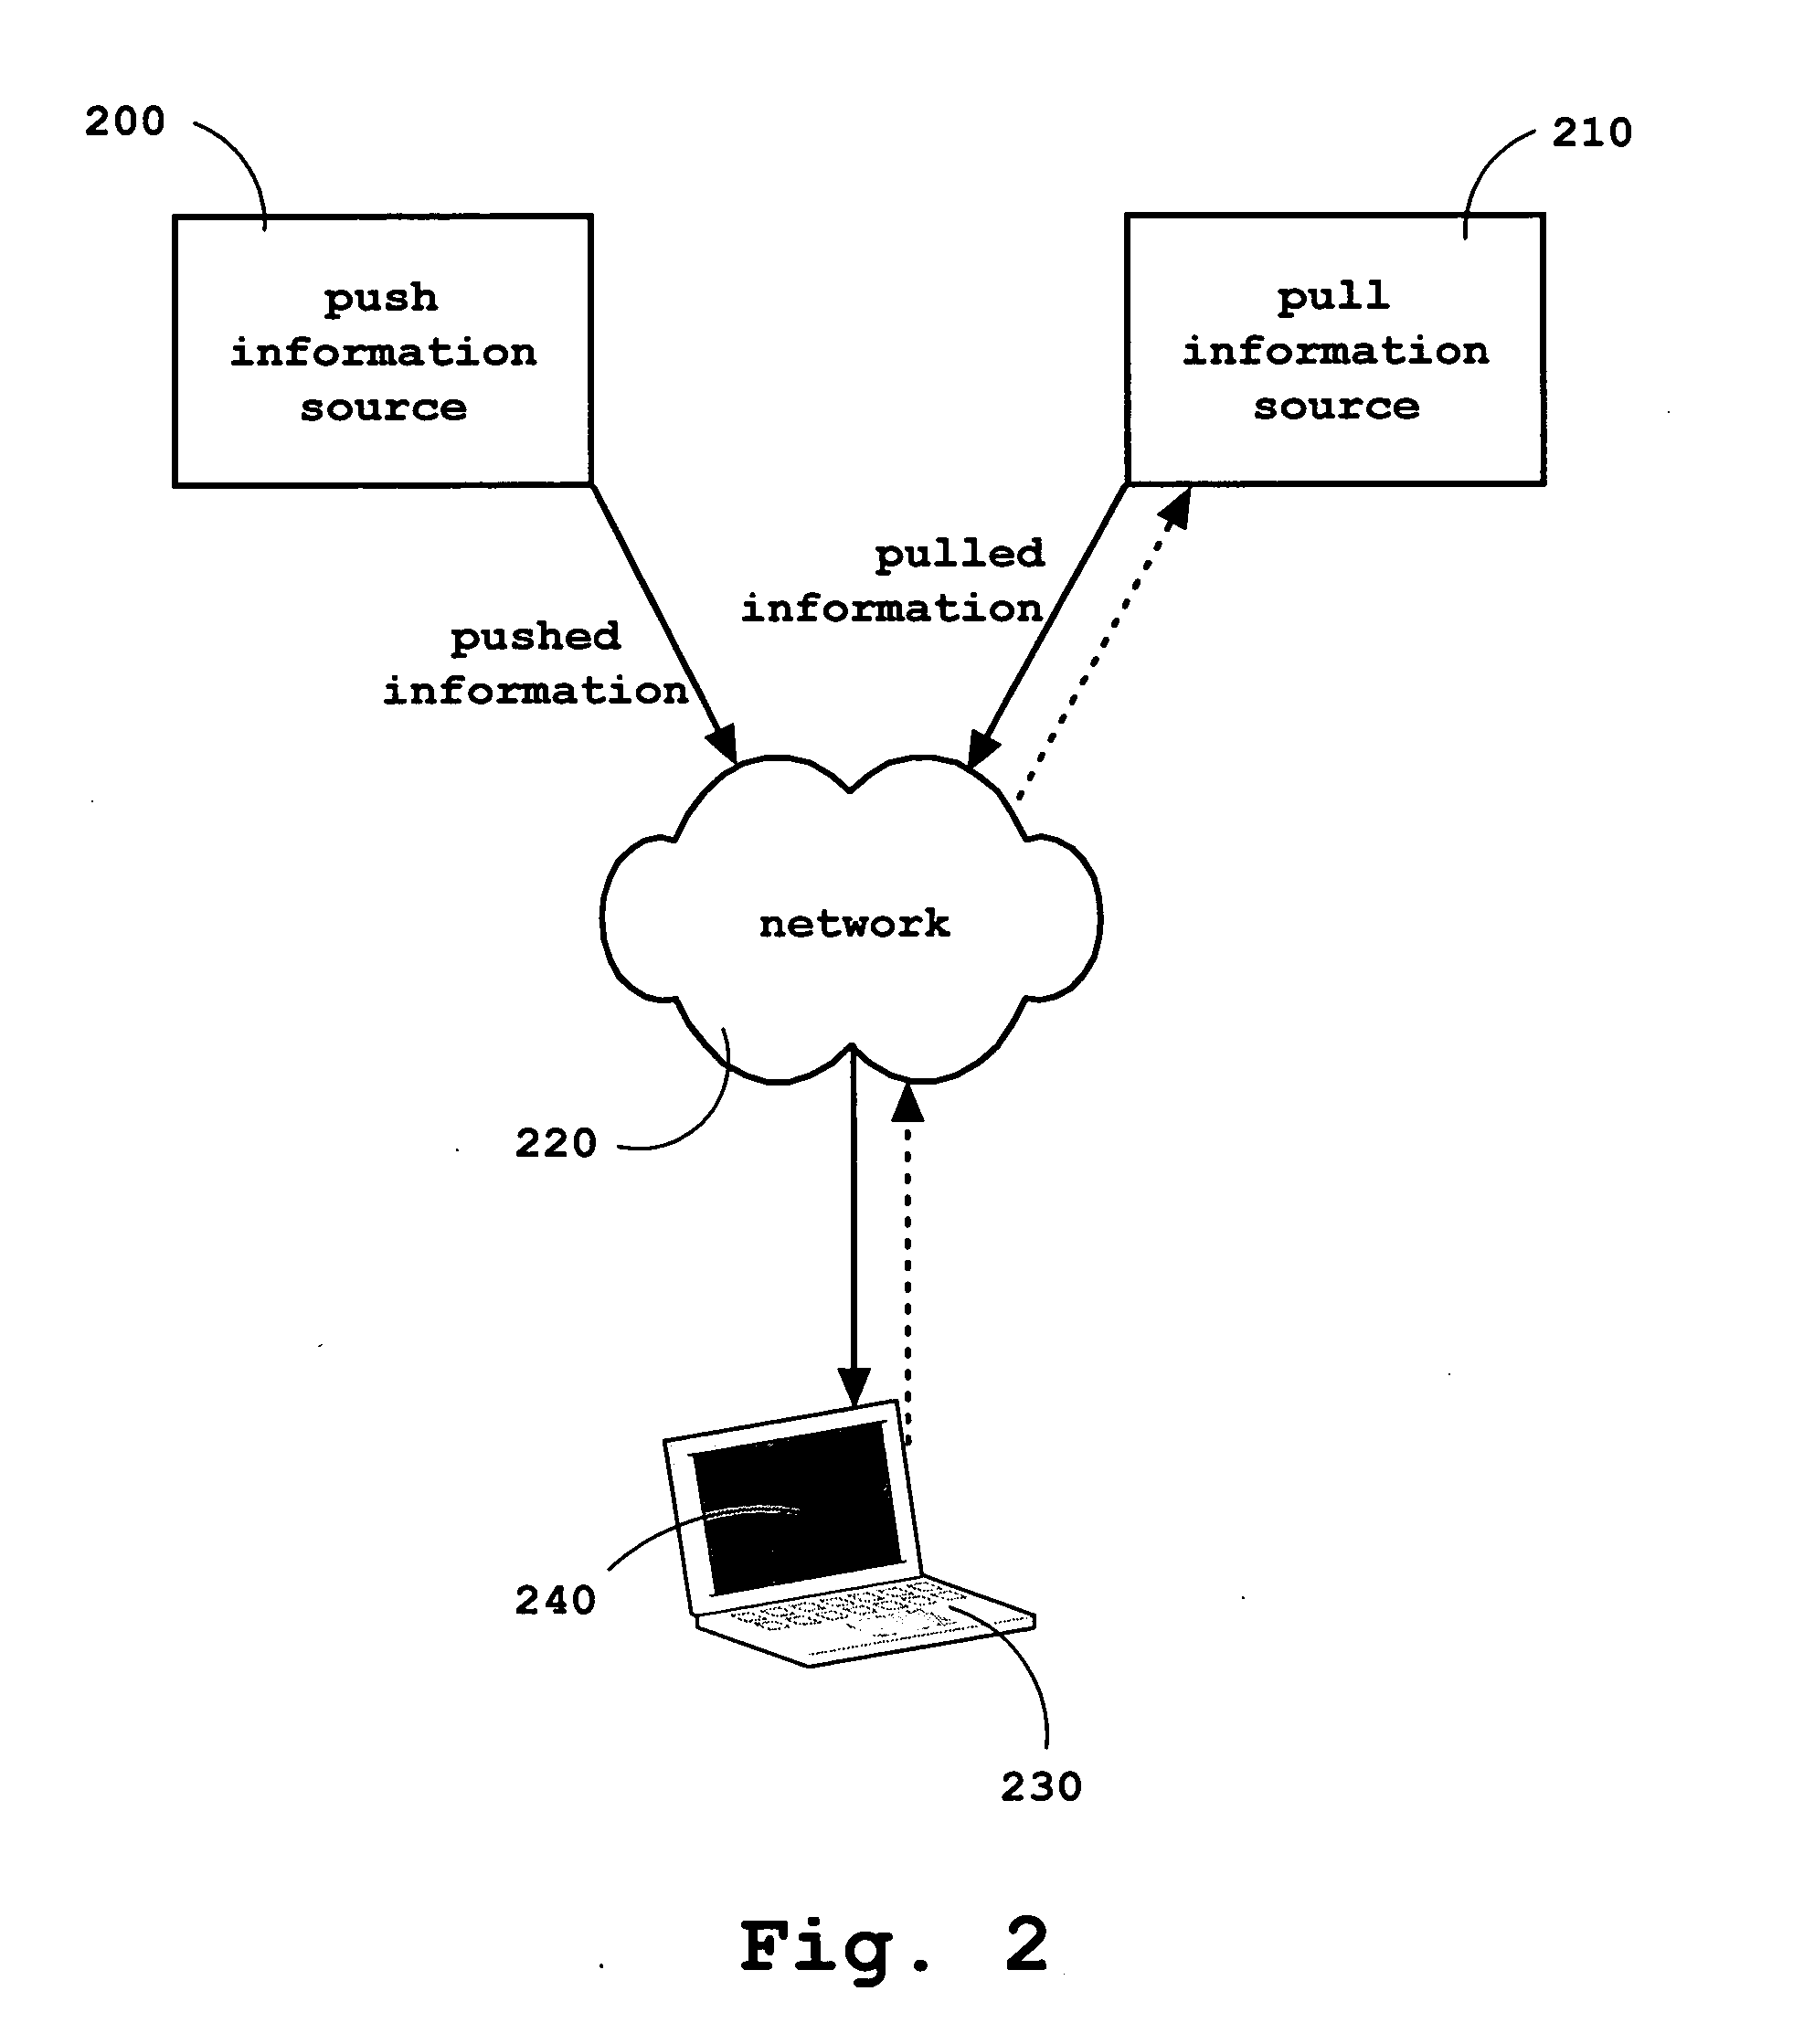 Textpane for pushed and pulled information on a computing device